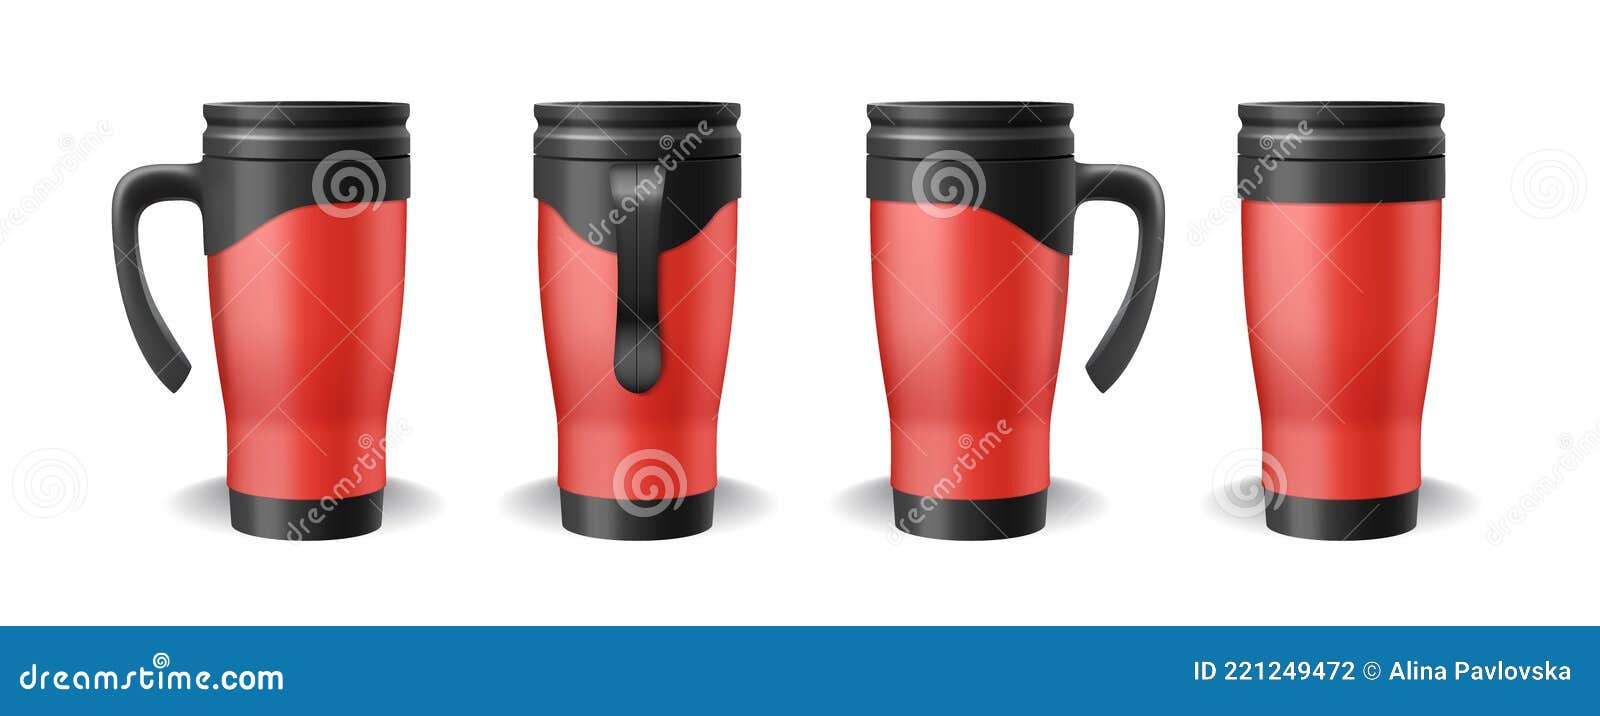 Thermoses and thermo mugs set. Red plastic stainless steel